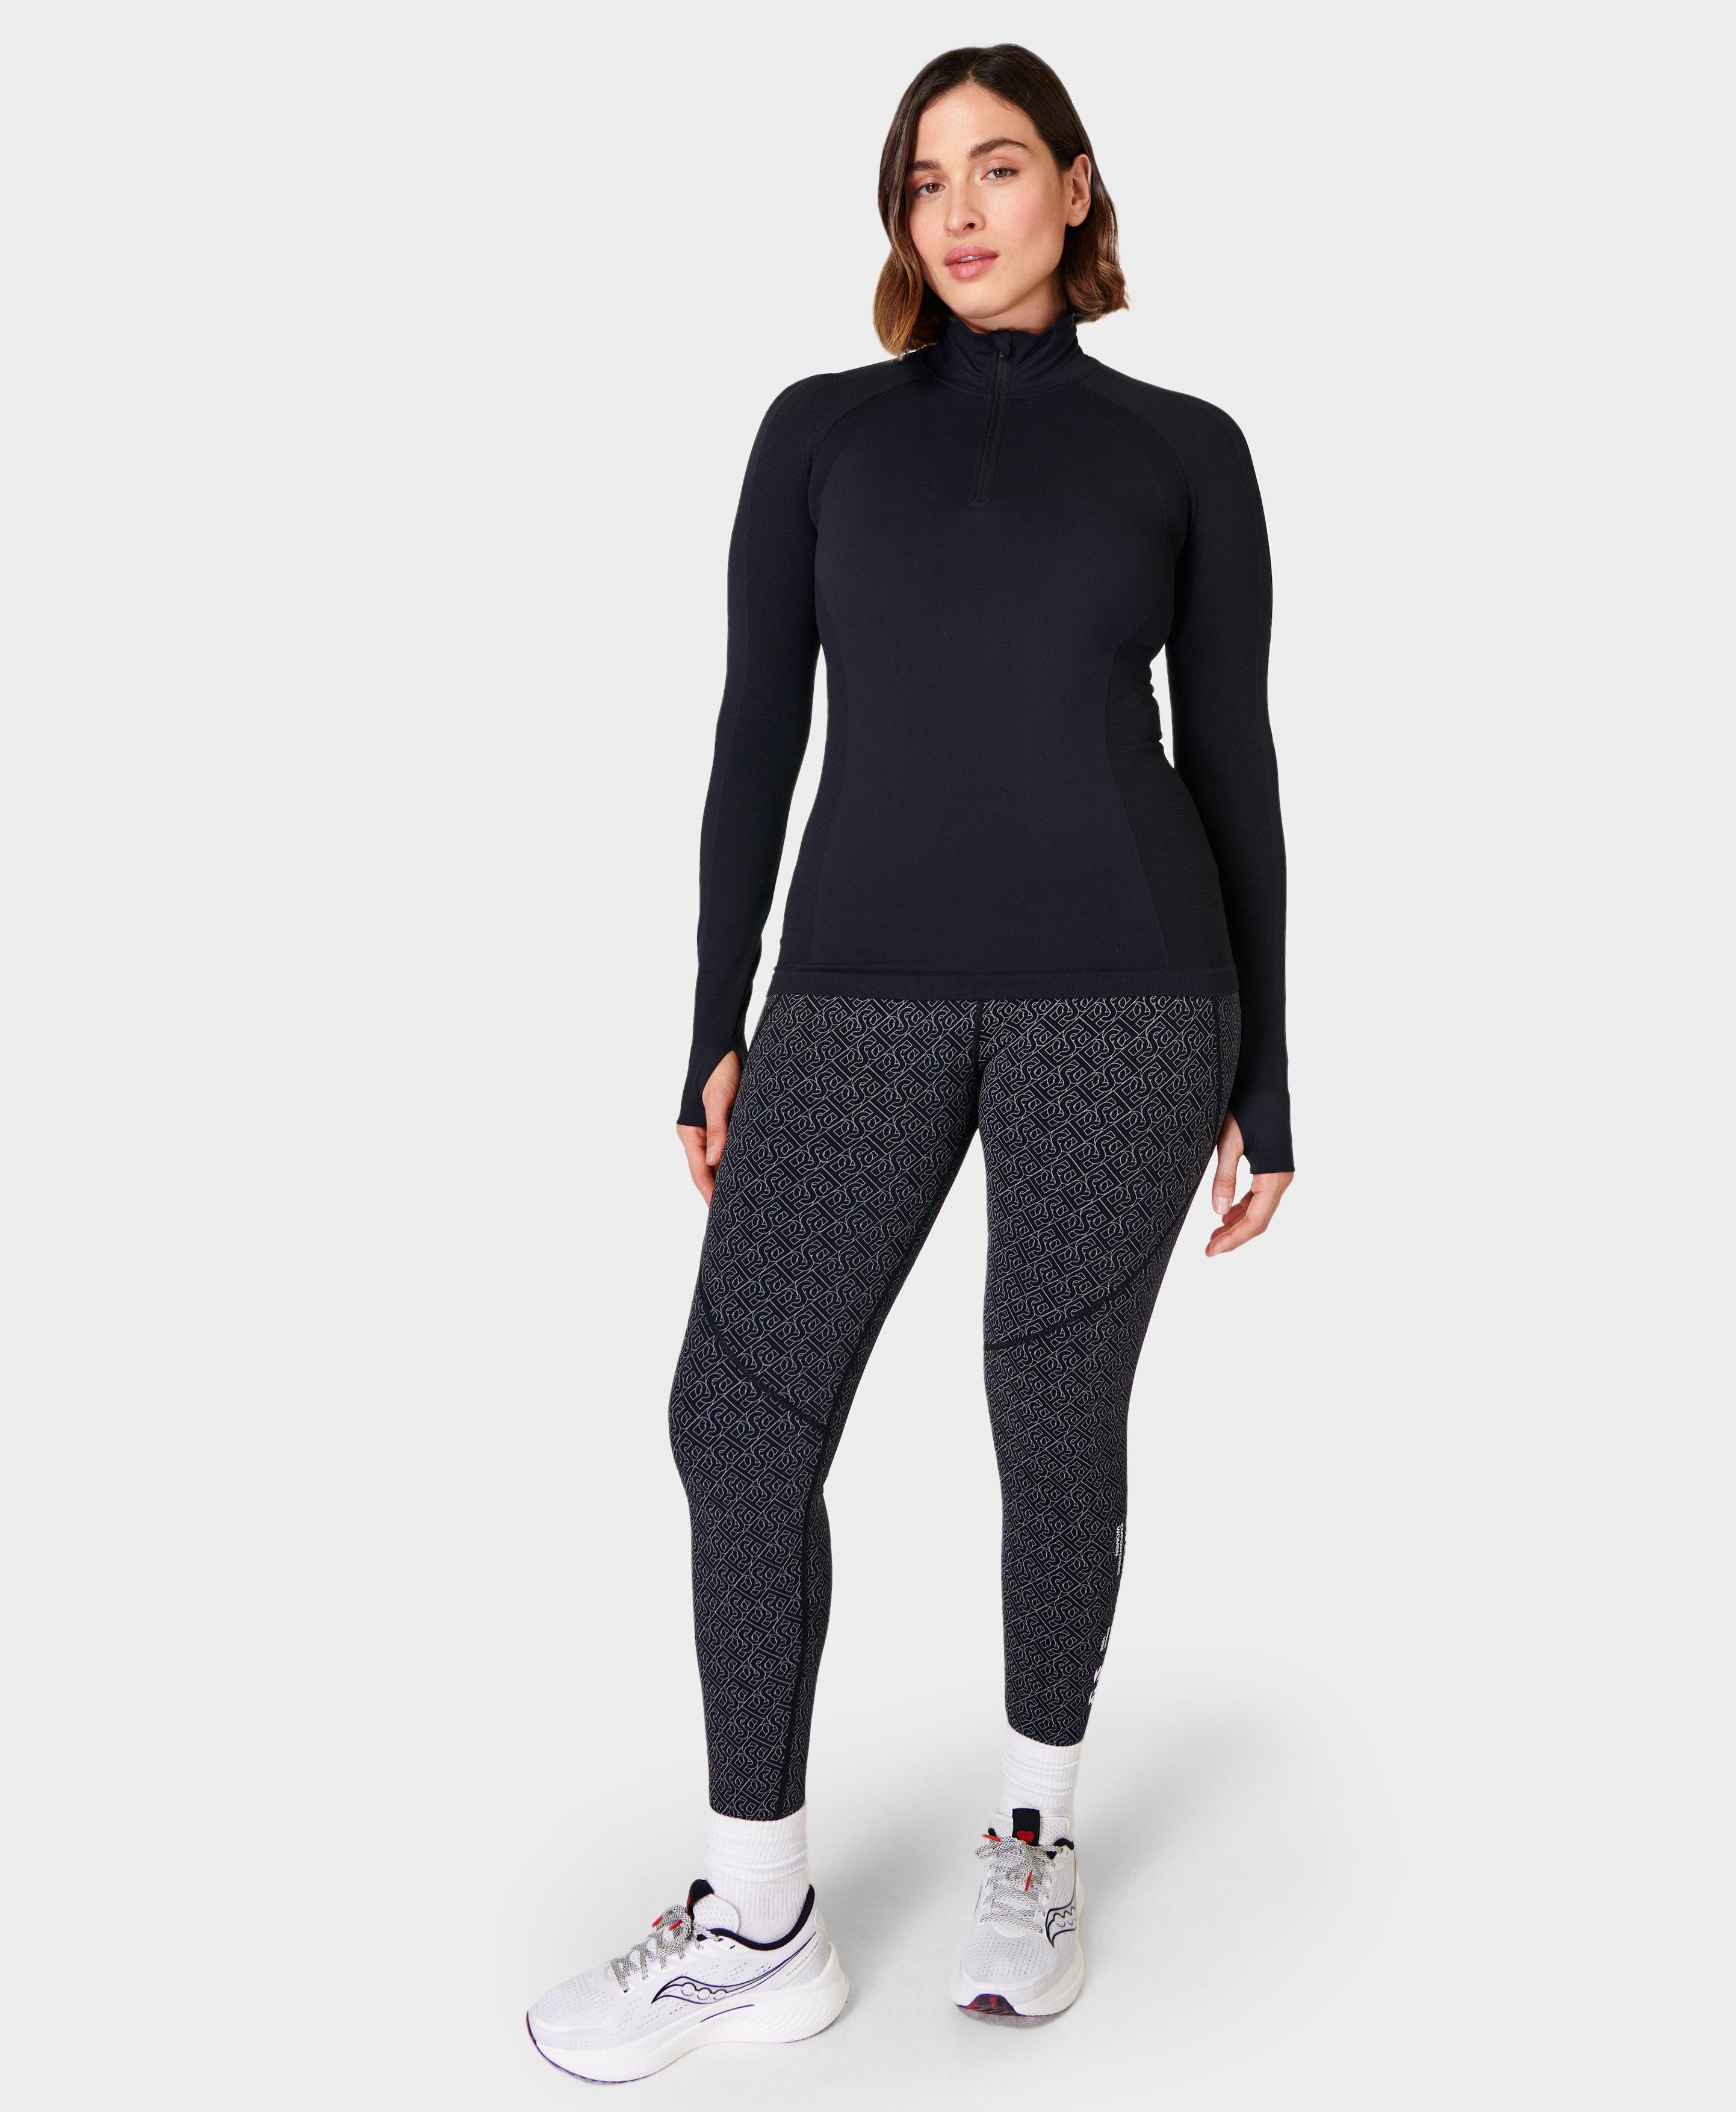 Athlete Seamless Workout Long Sleeve Top - Black, Women's Base Layers & Long  Sleeve Tops